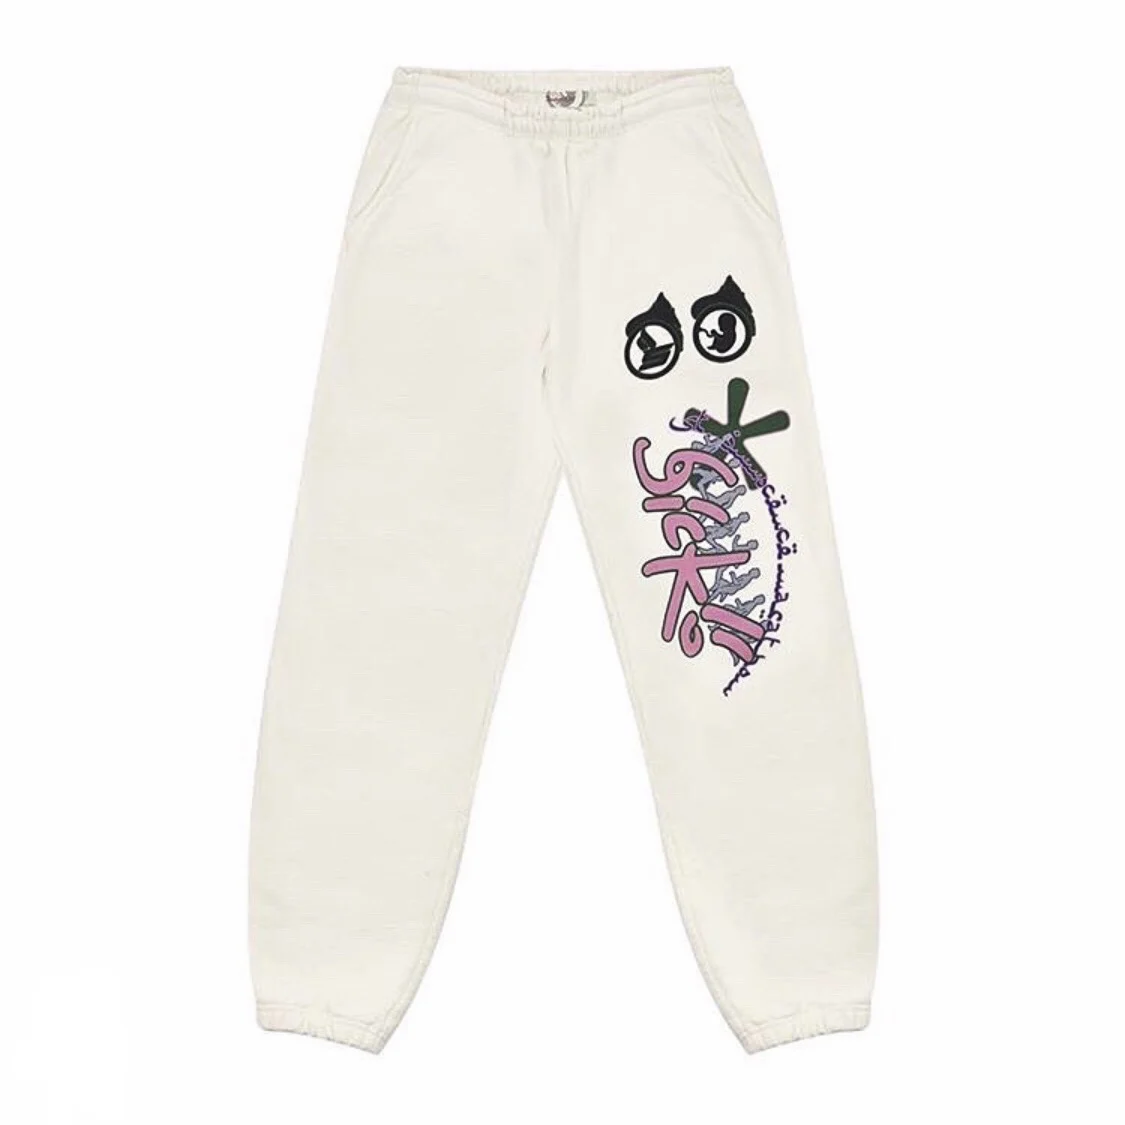 High New luxury Men 2022 Born From Pain IAN CONNOR Sicko White Comfortable Cotton Parkour Sweat Casual Pants Sweatpants #34